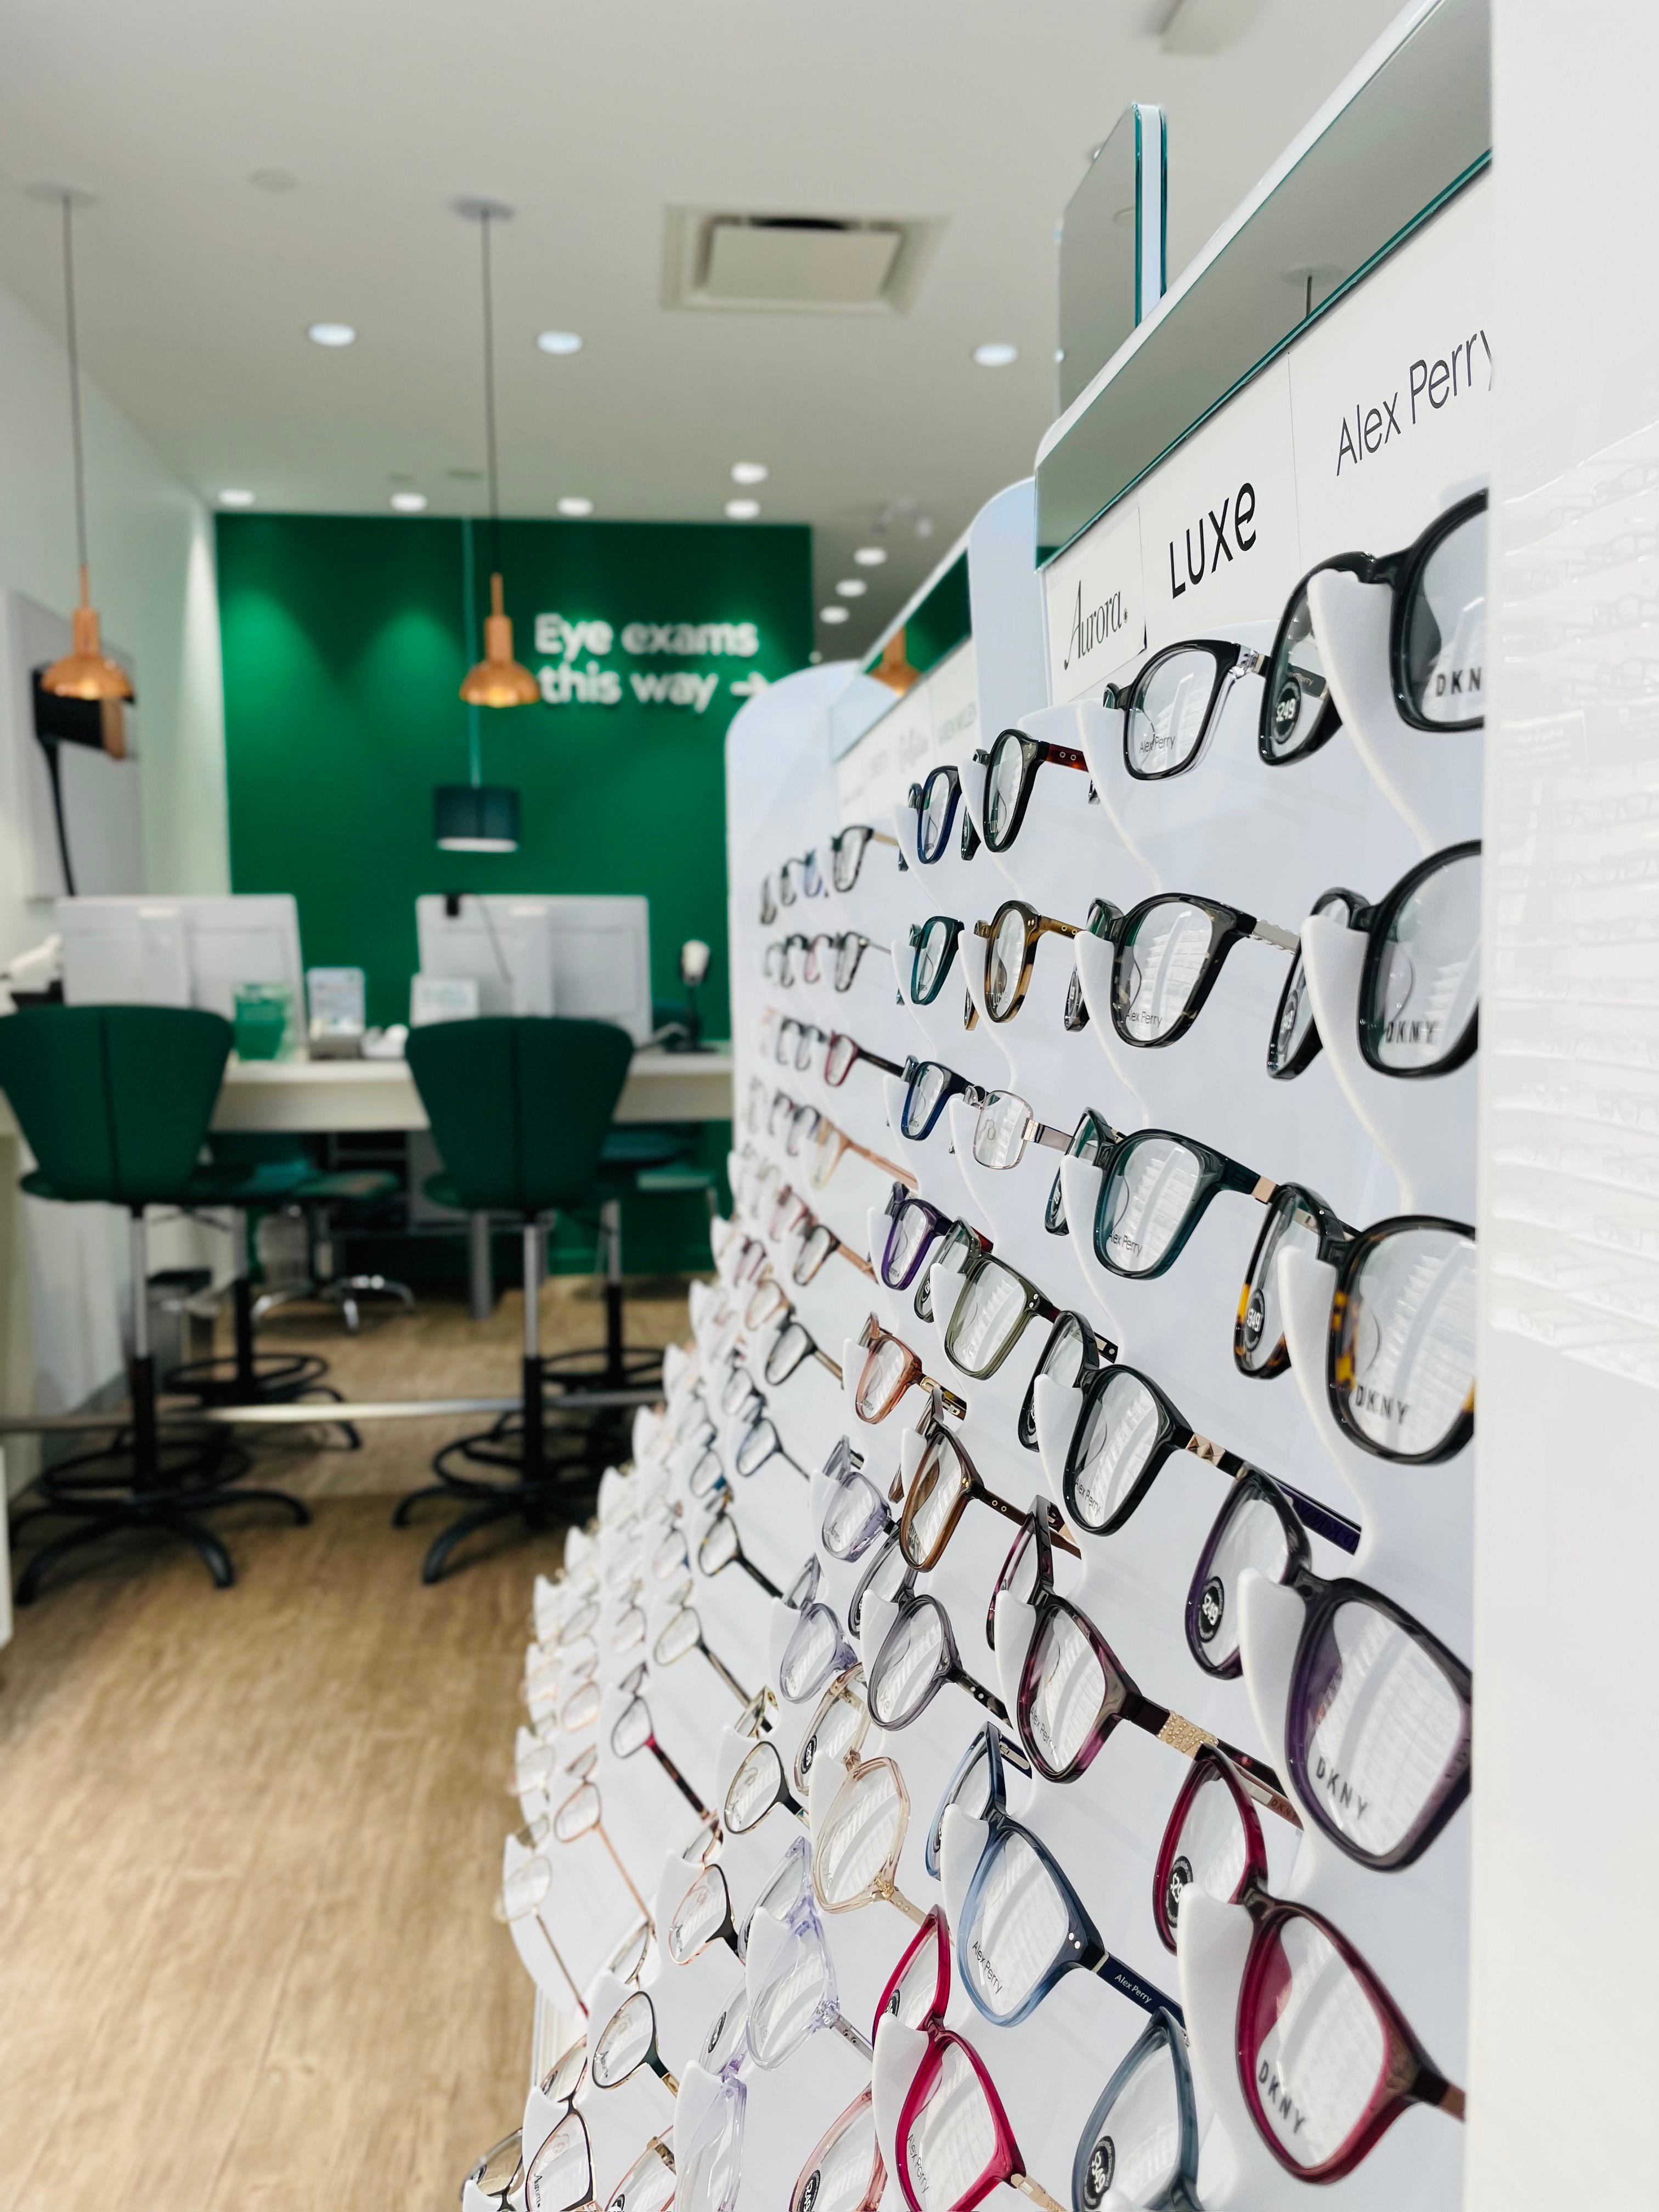 Images Specsavers Hastings - Sunrise